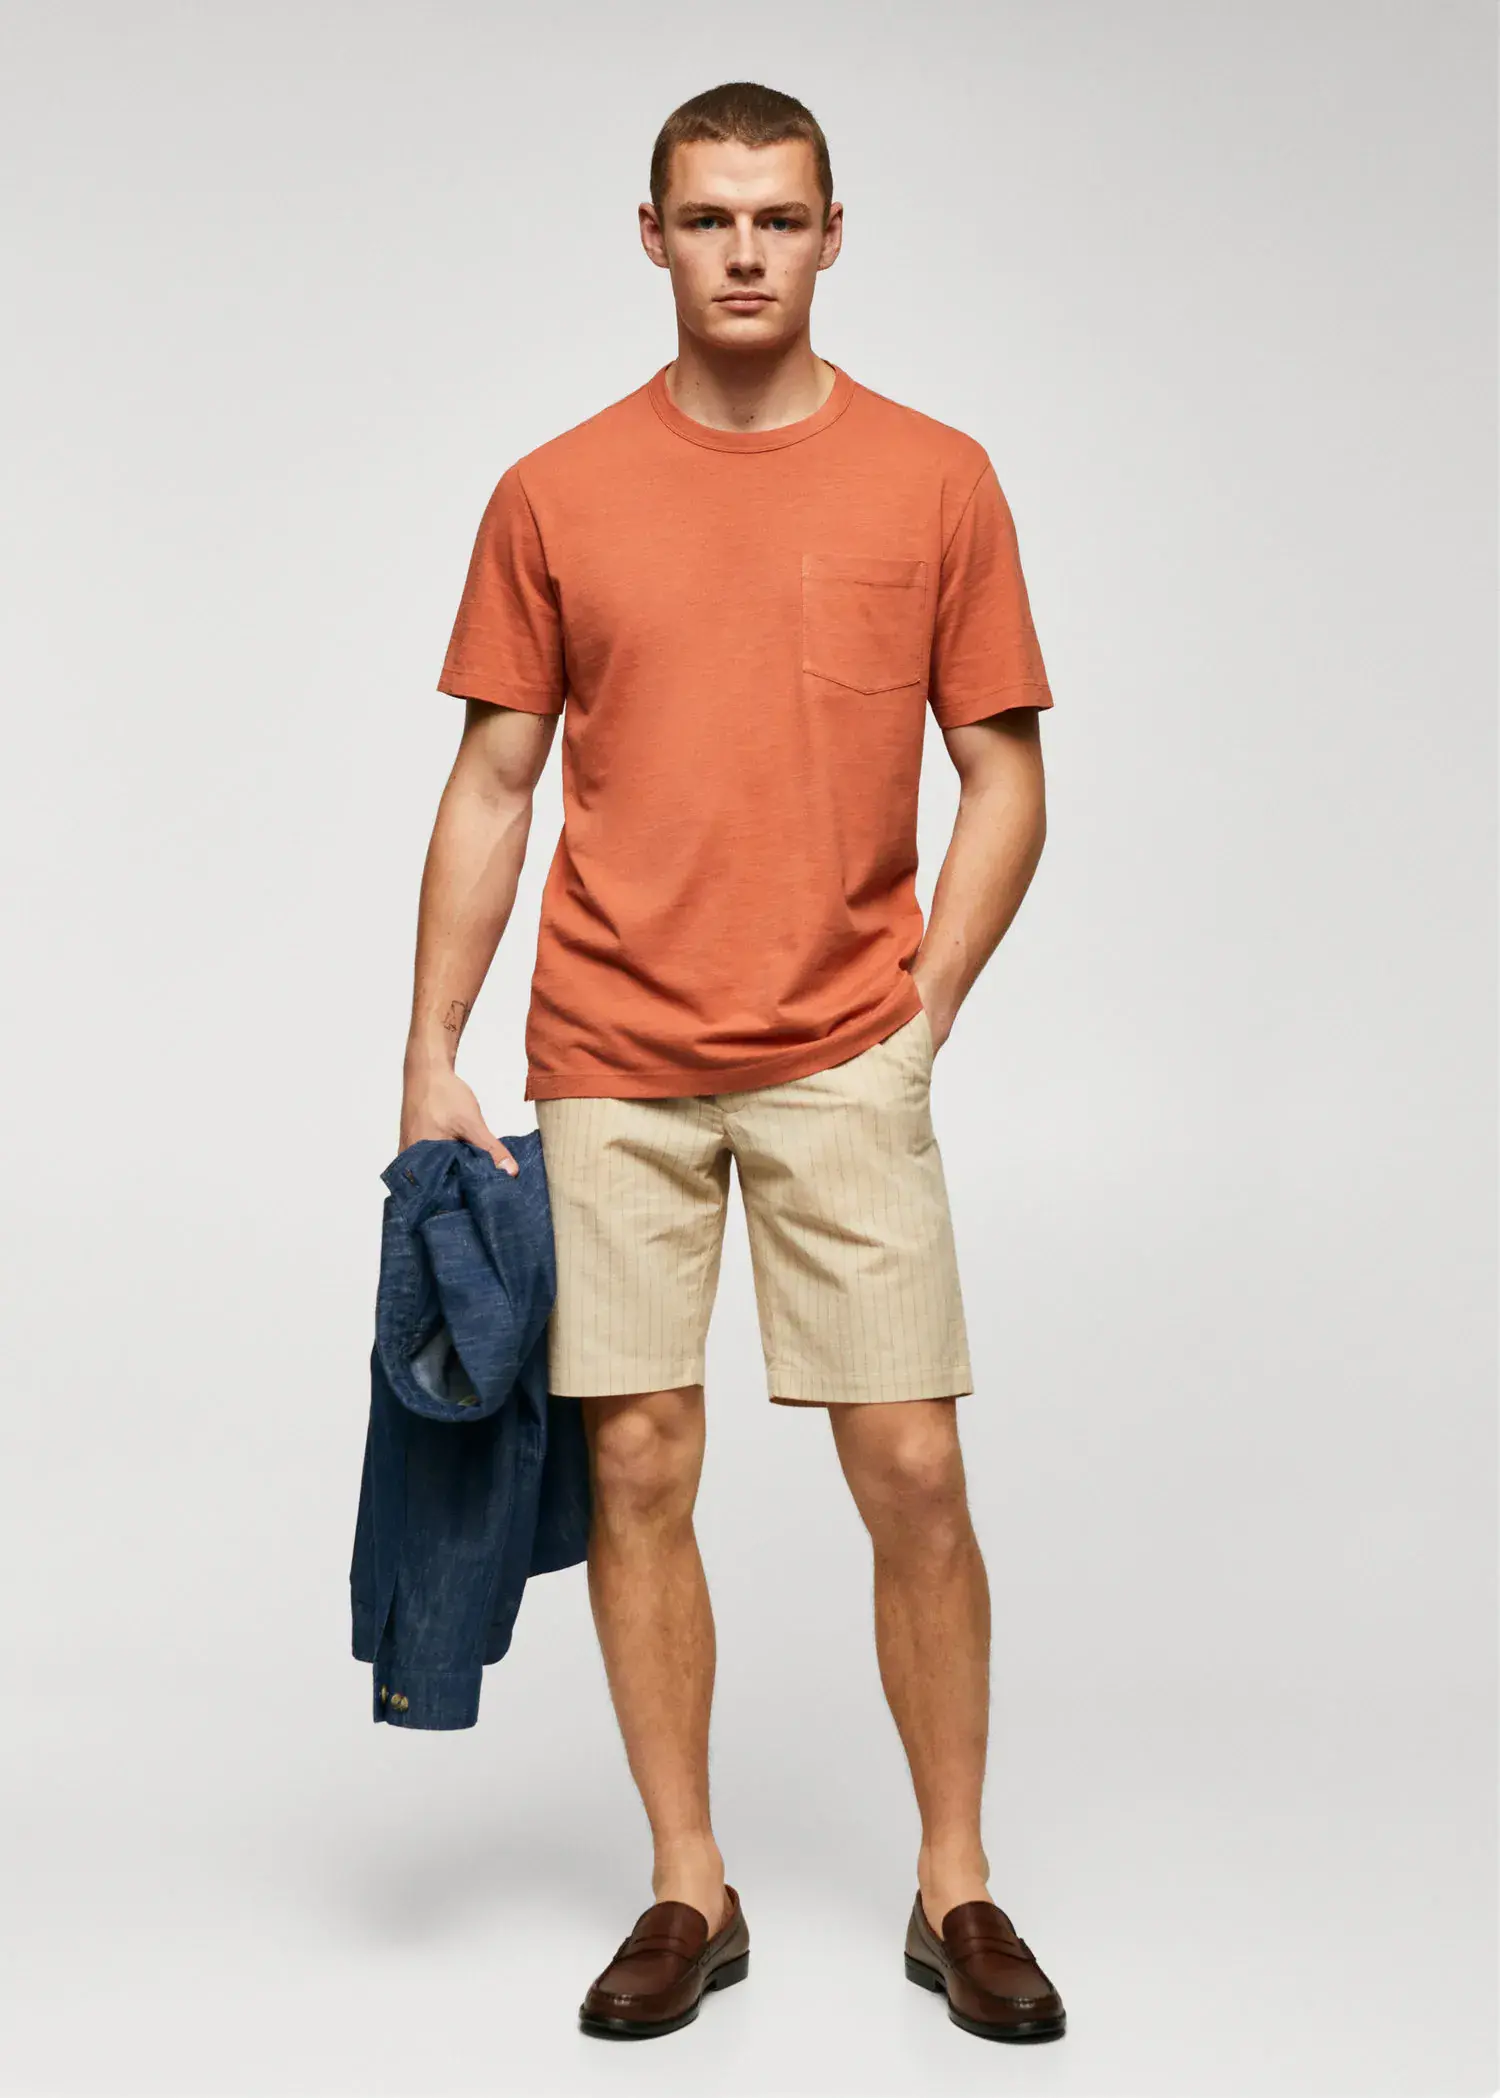 Mango 100% cotton t-shirt with pocket. a young man in shorts and an orange t-shirt. 